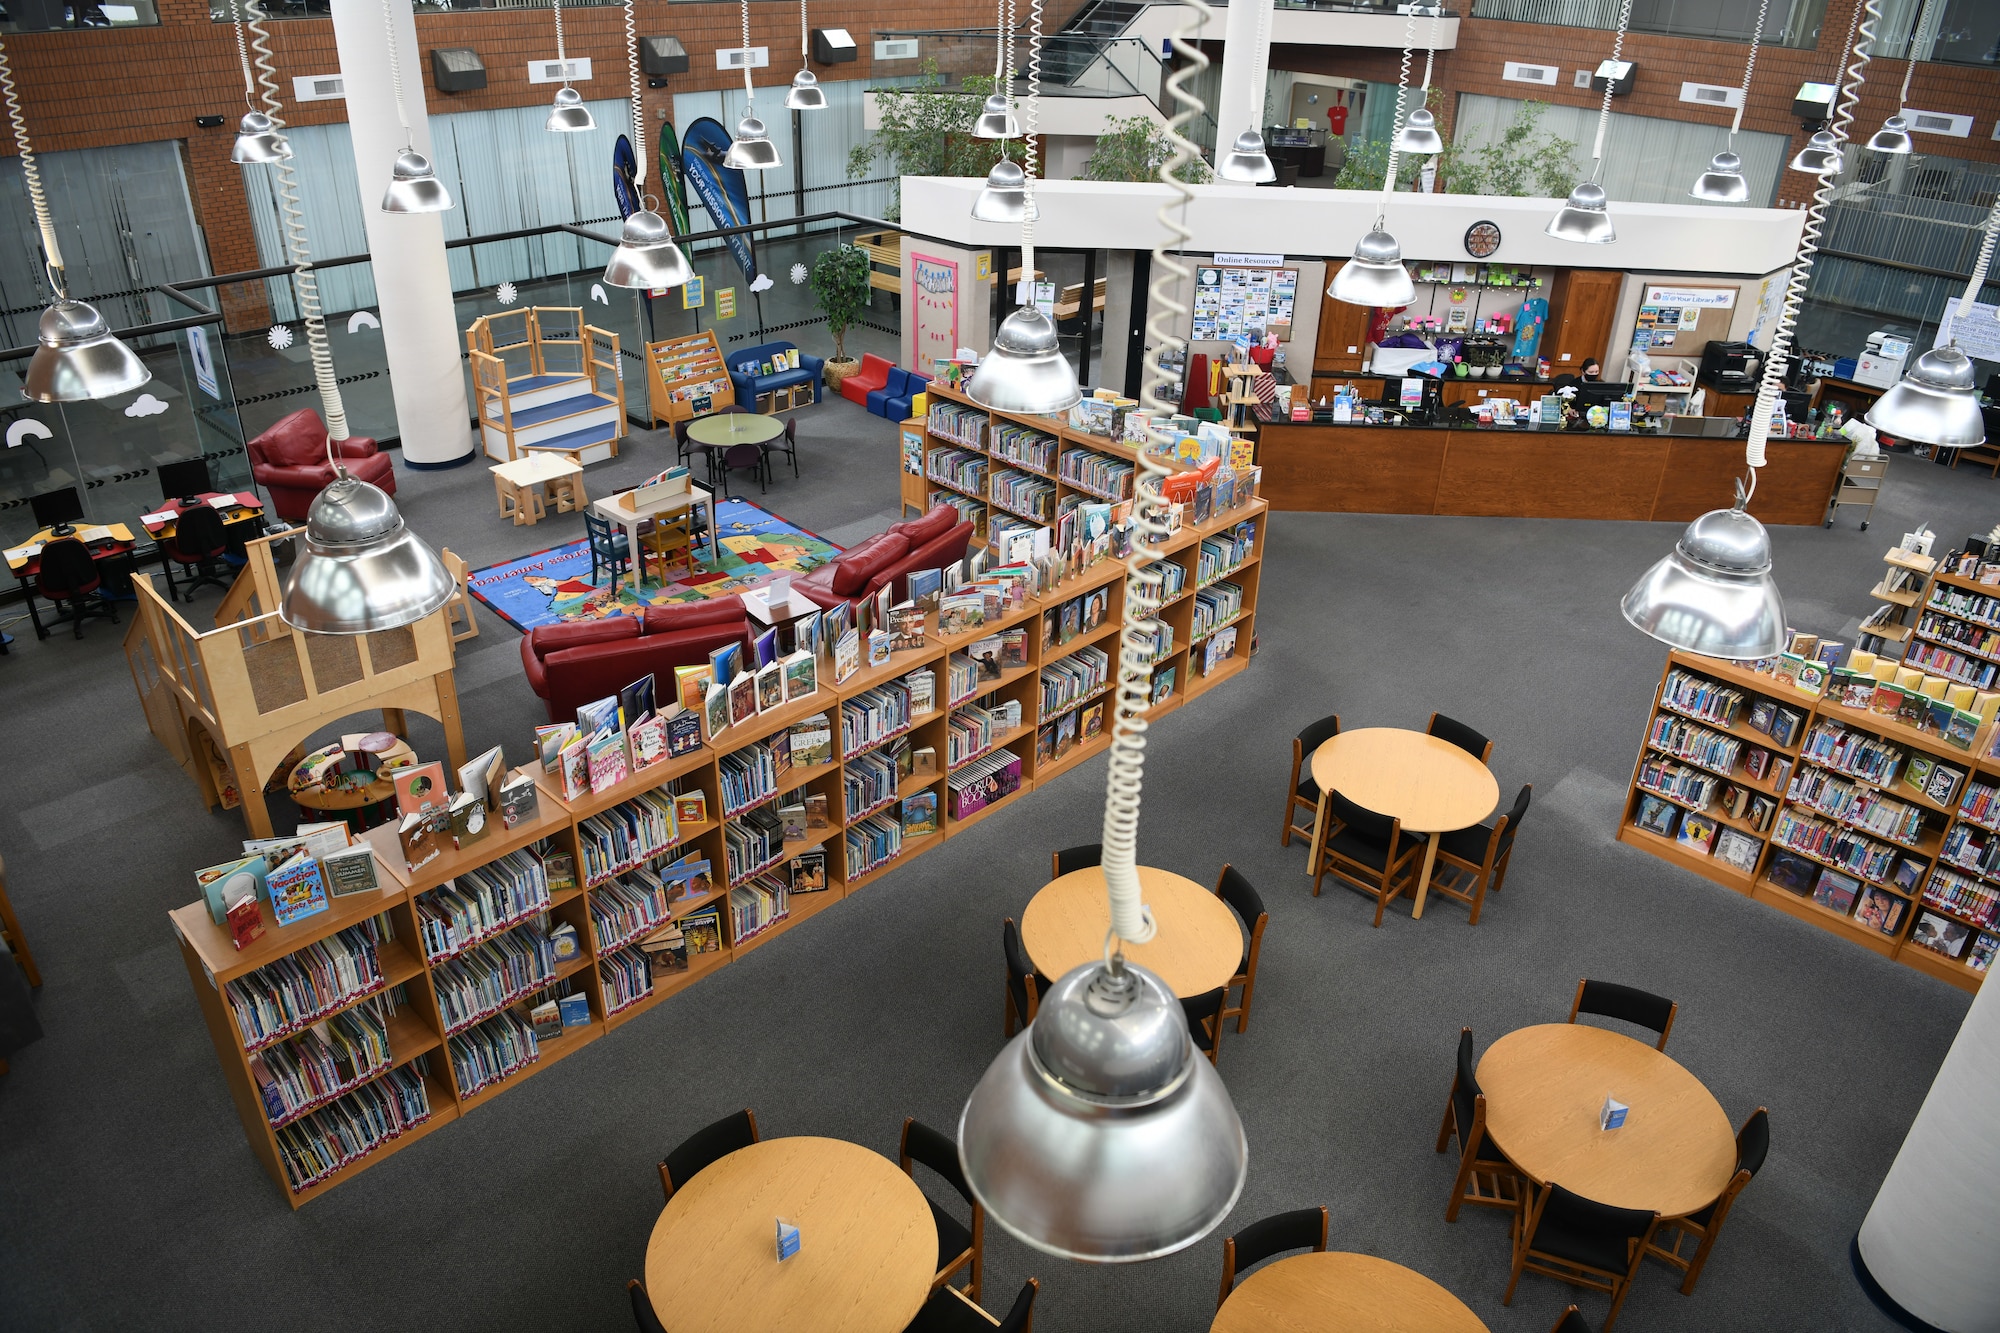 The Robins library staff has readied the facility to welcome patrons once again, June 15, 2020. New rules have been put in place to keep visitors safe during the pandemic. The library is located on the first floor of the 78th Air Base Wing Headquarters, Bldg. 905. (U.S. Air Force photo by Kisha Johnson)